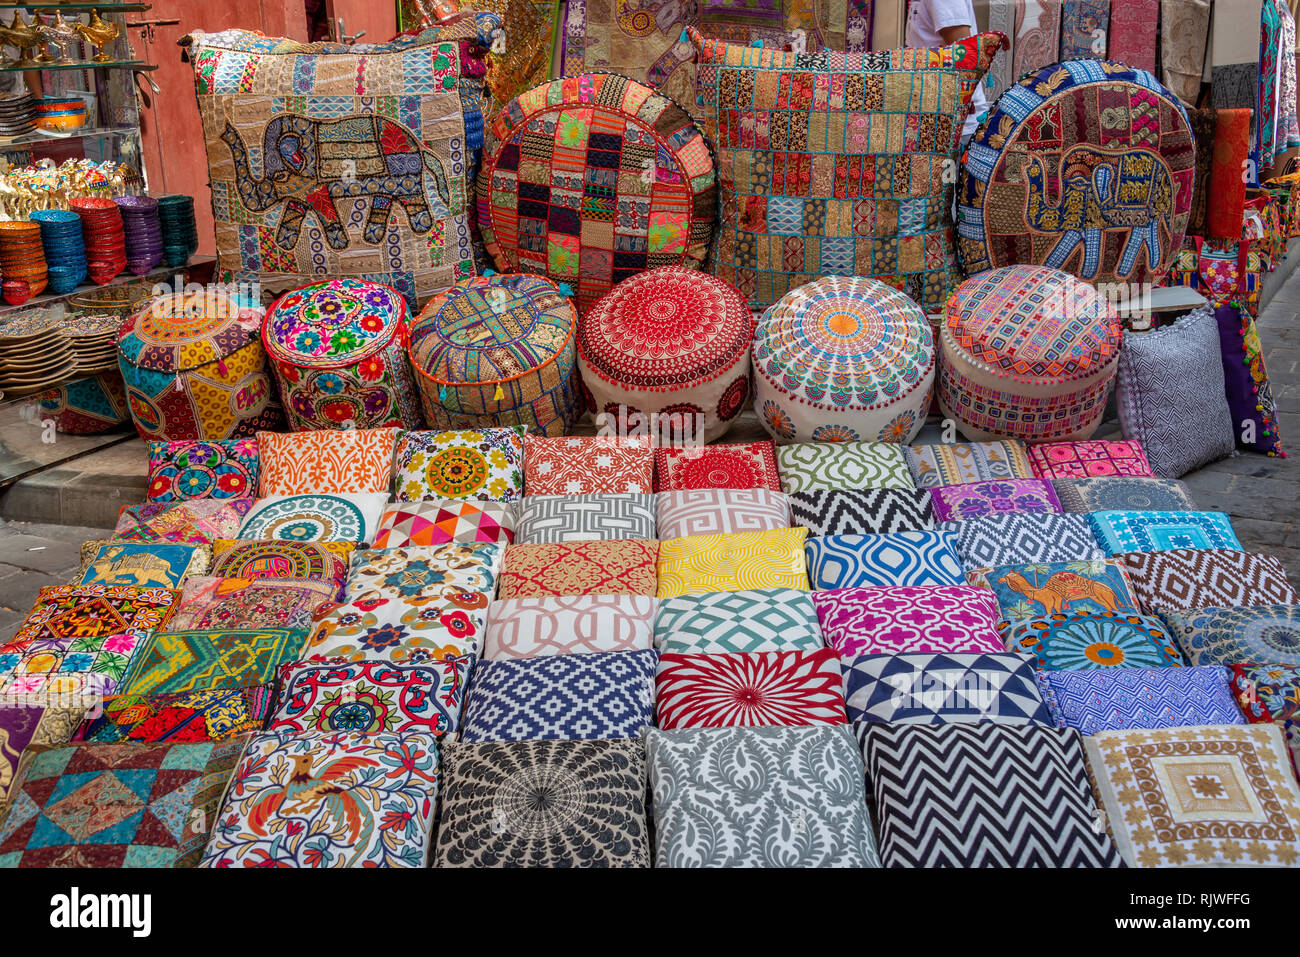 Colorful cushions and pillows in Dubai souks, United Arab Emirates Stock Photo